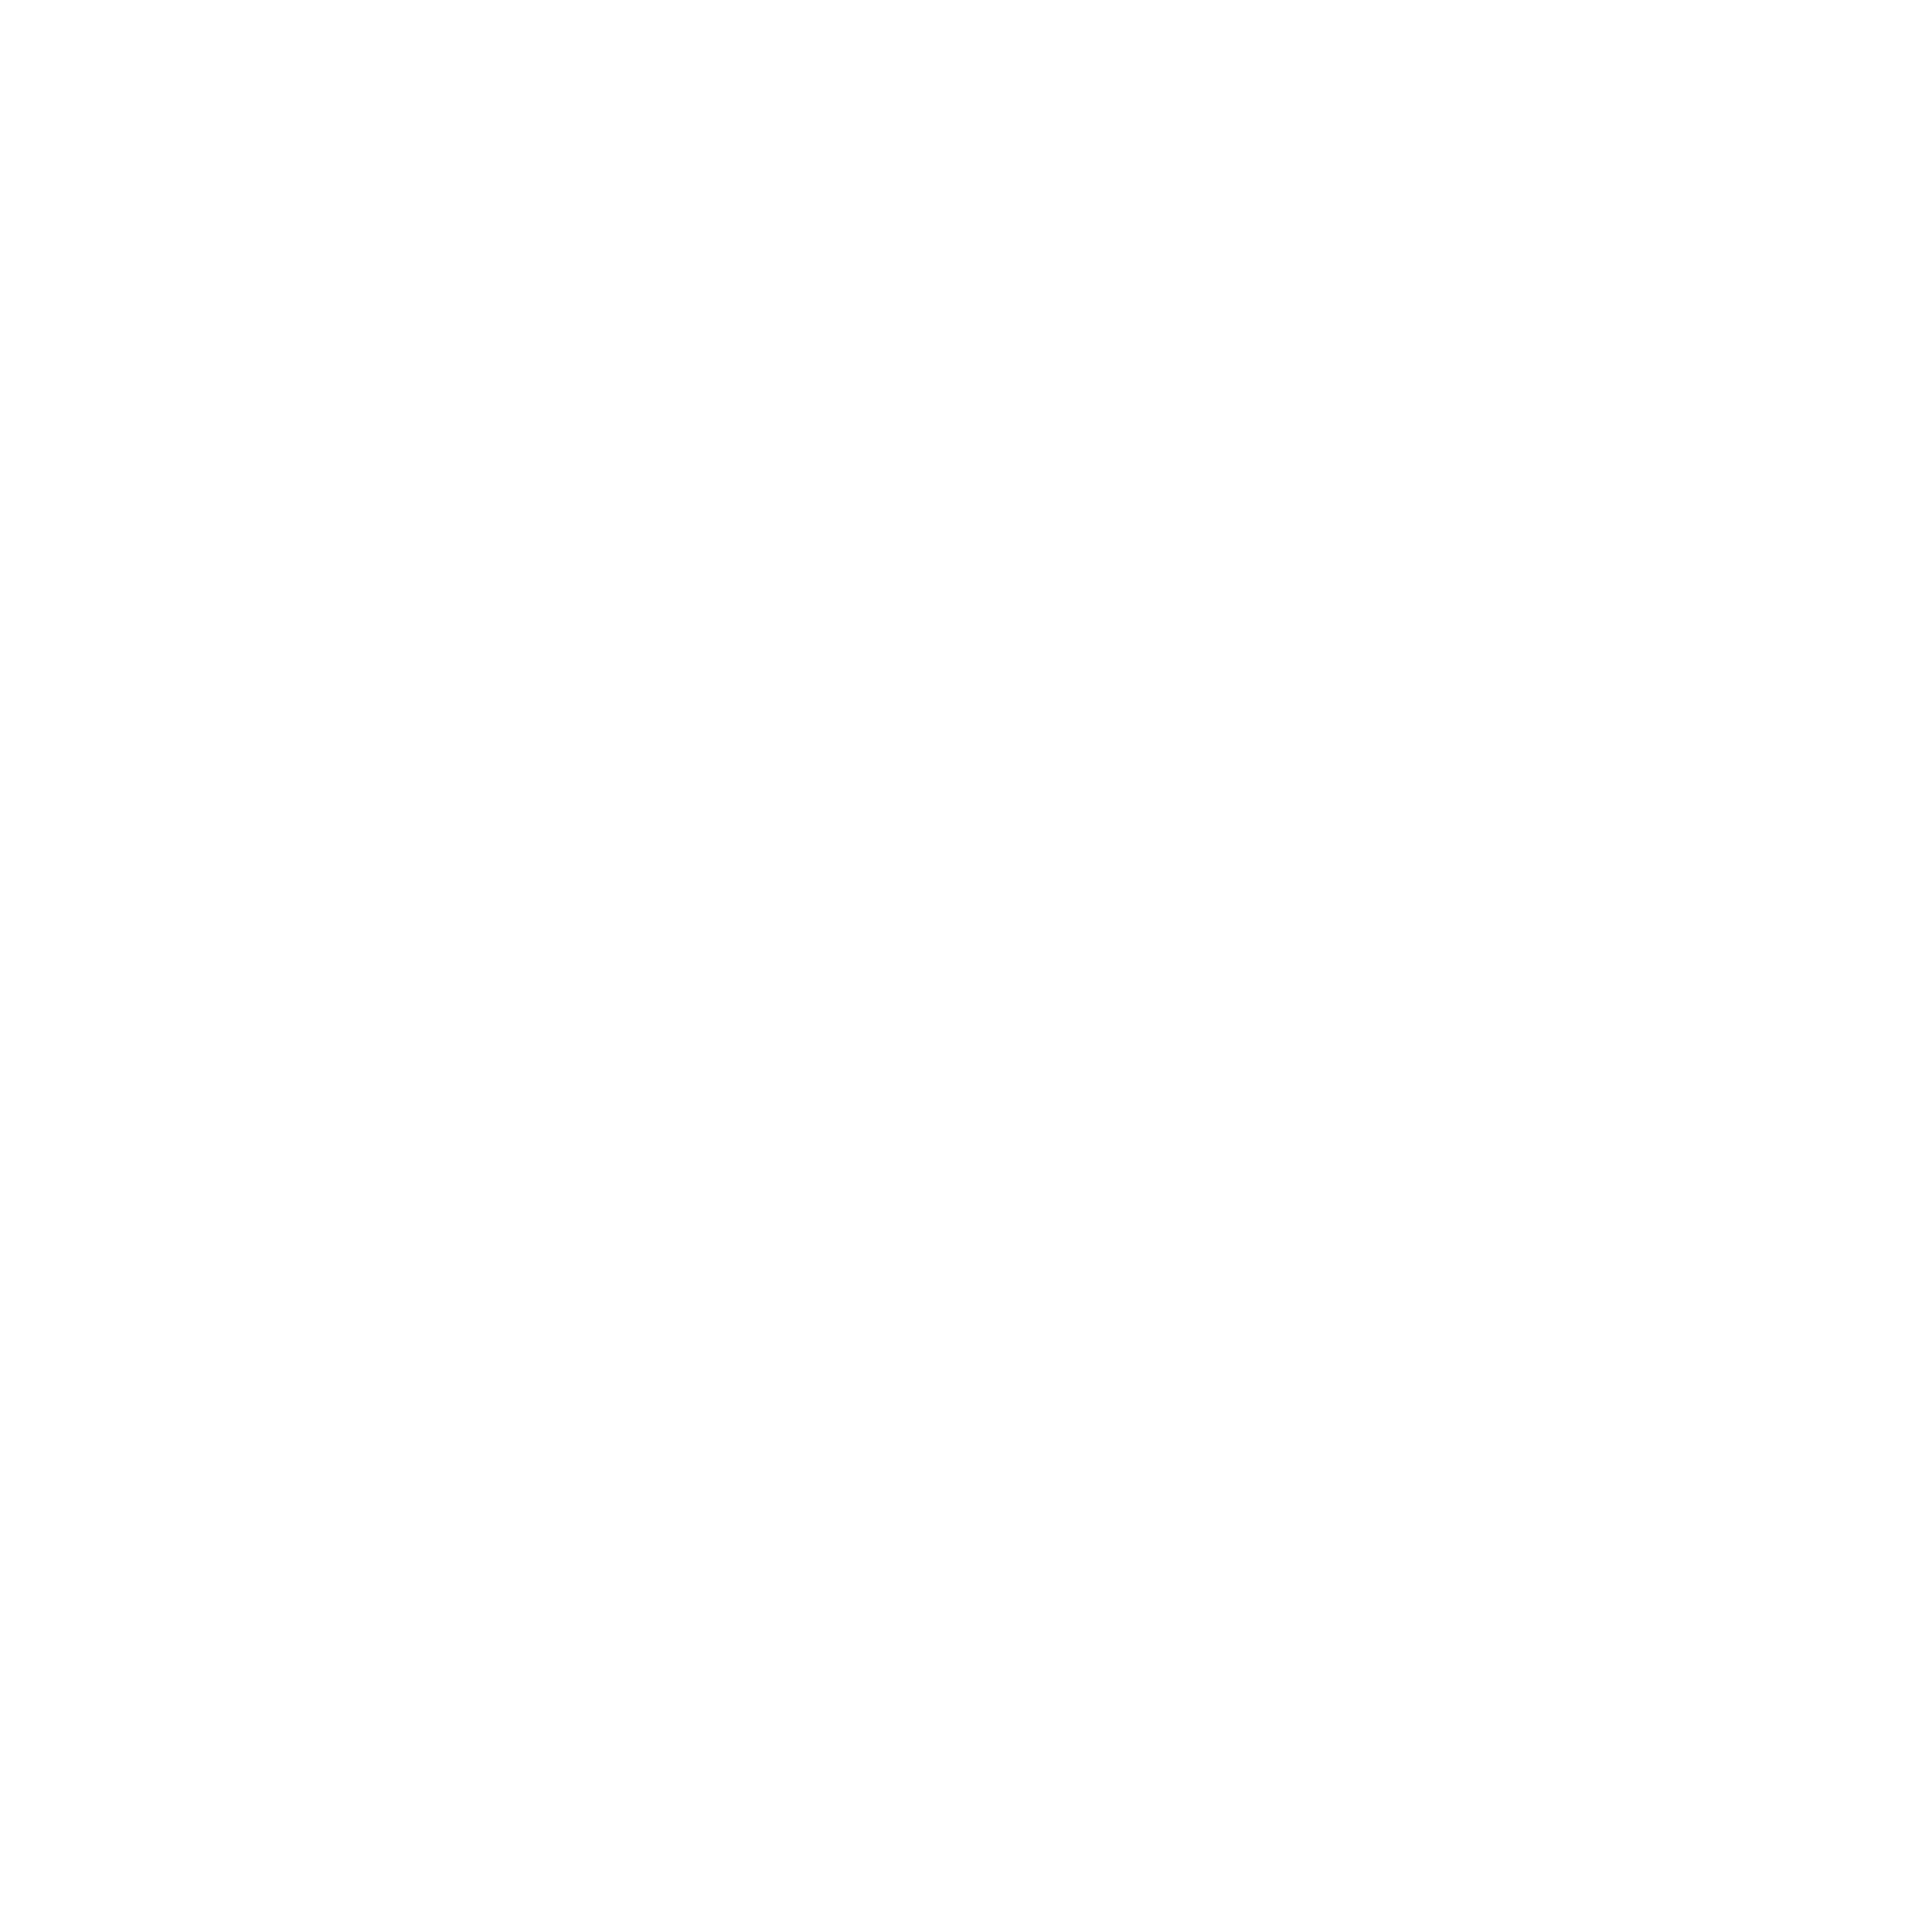 LOGO Here&now (3)